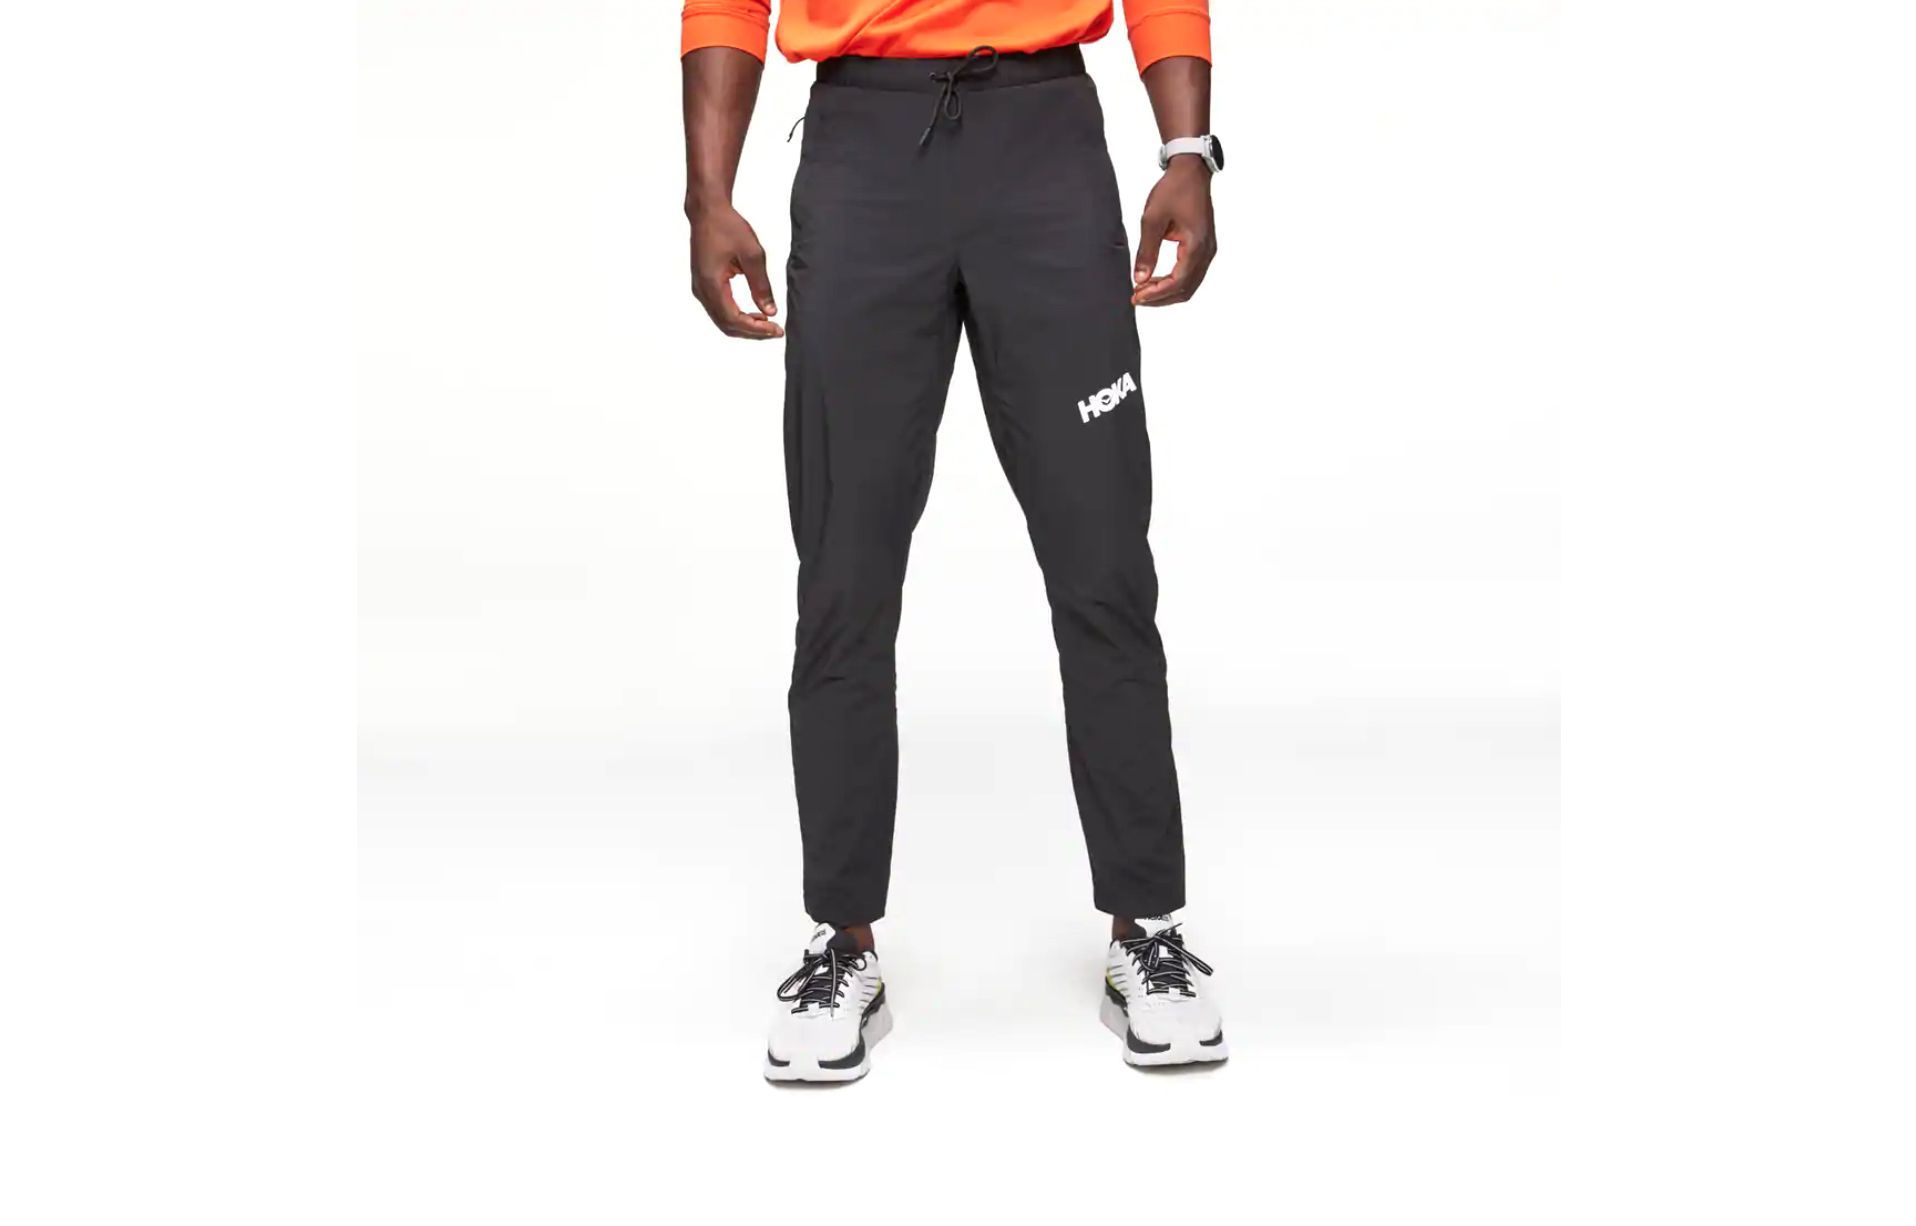 Angcoco Mens Casual Harem Jogging Pants Tracksuit Training Running Trousers 